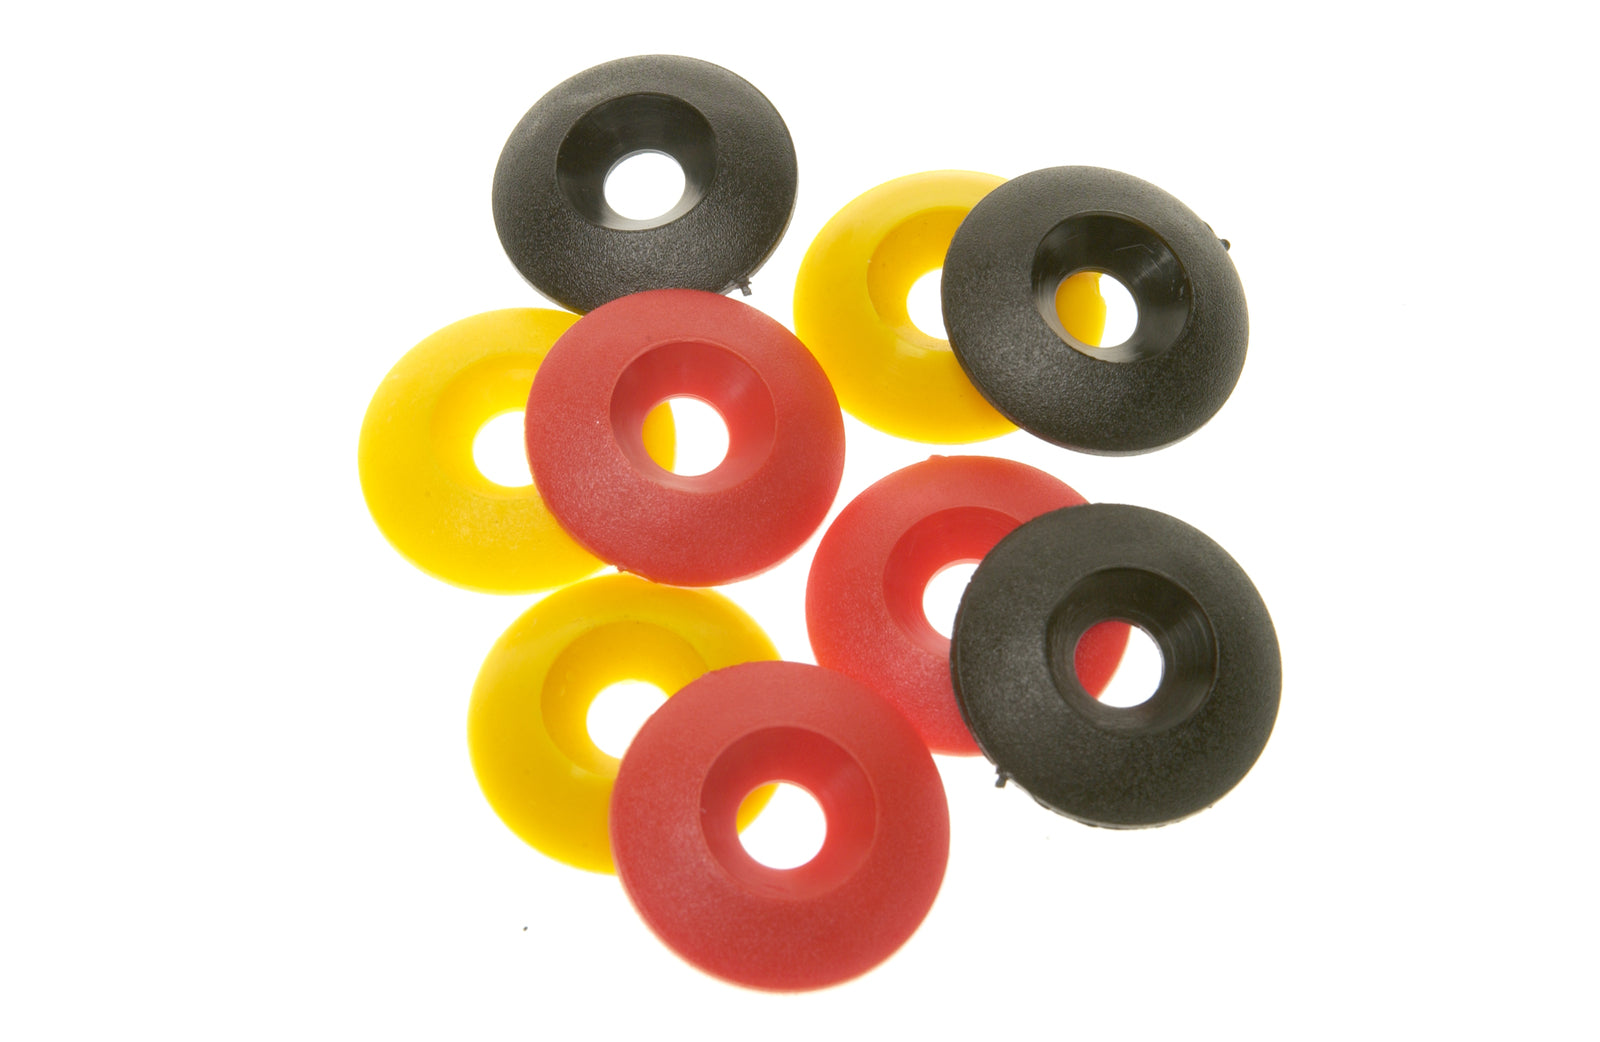 C/S Washer 30x8mm Plastic - Red